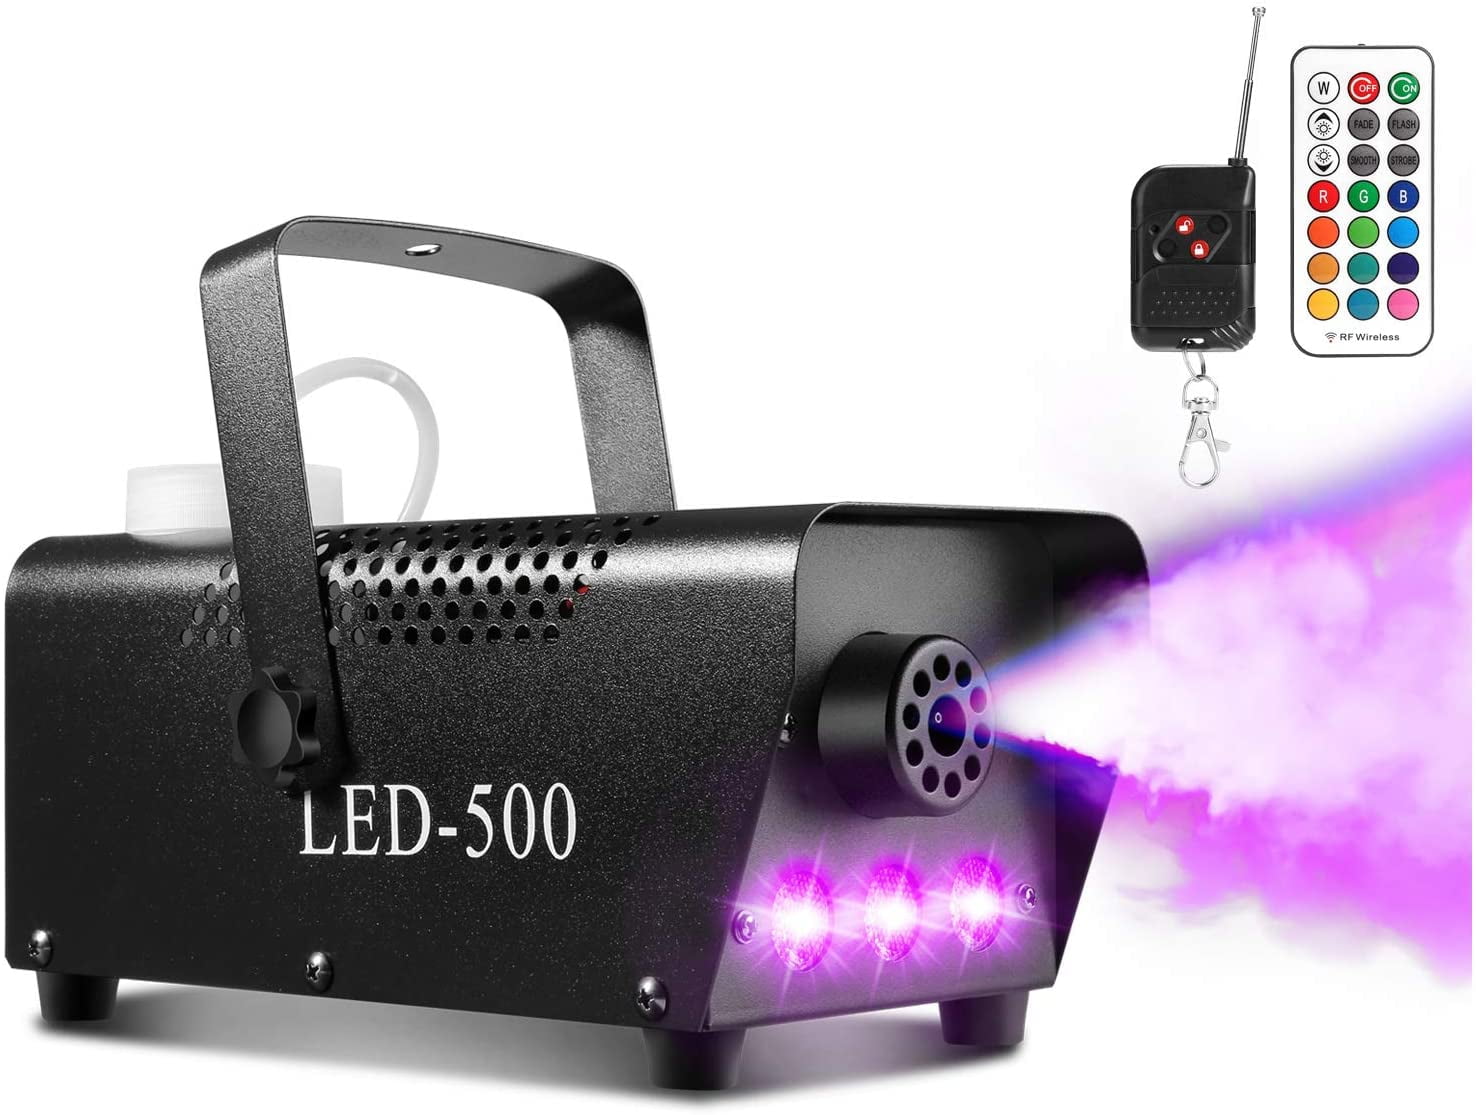 Smoke Machine, AGPTEK Fog Machine with 13 Colorful LED Lights Effect, 500W  and 2000CFM Fog with 1 Wired Receiver and 2 Wireless Remote Controls, 